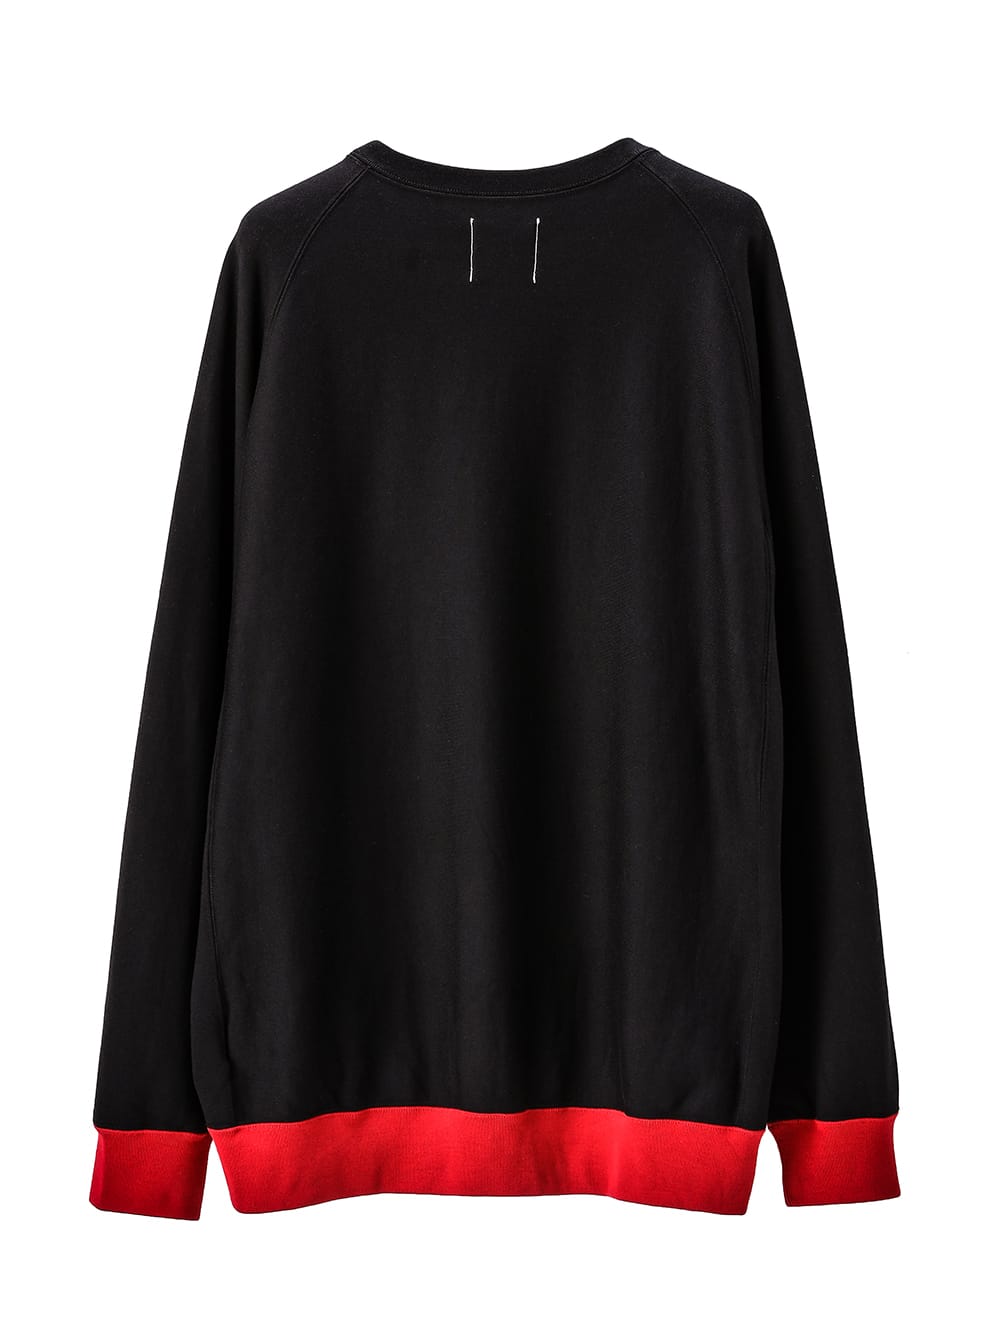 sxc.0001-black×red Listen To The Soloist.(oversized bicolor ...